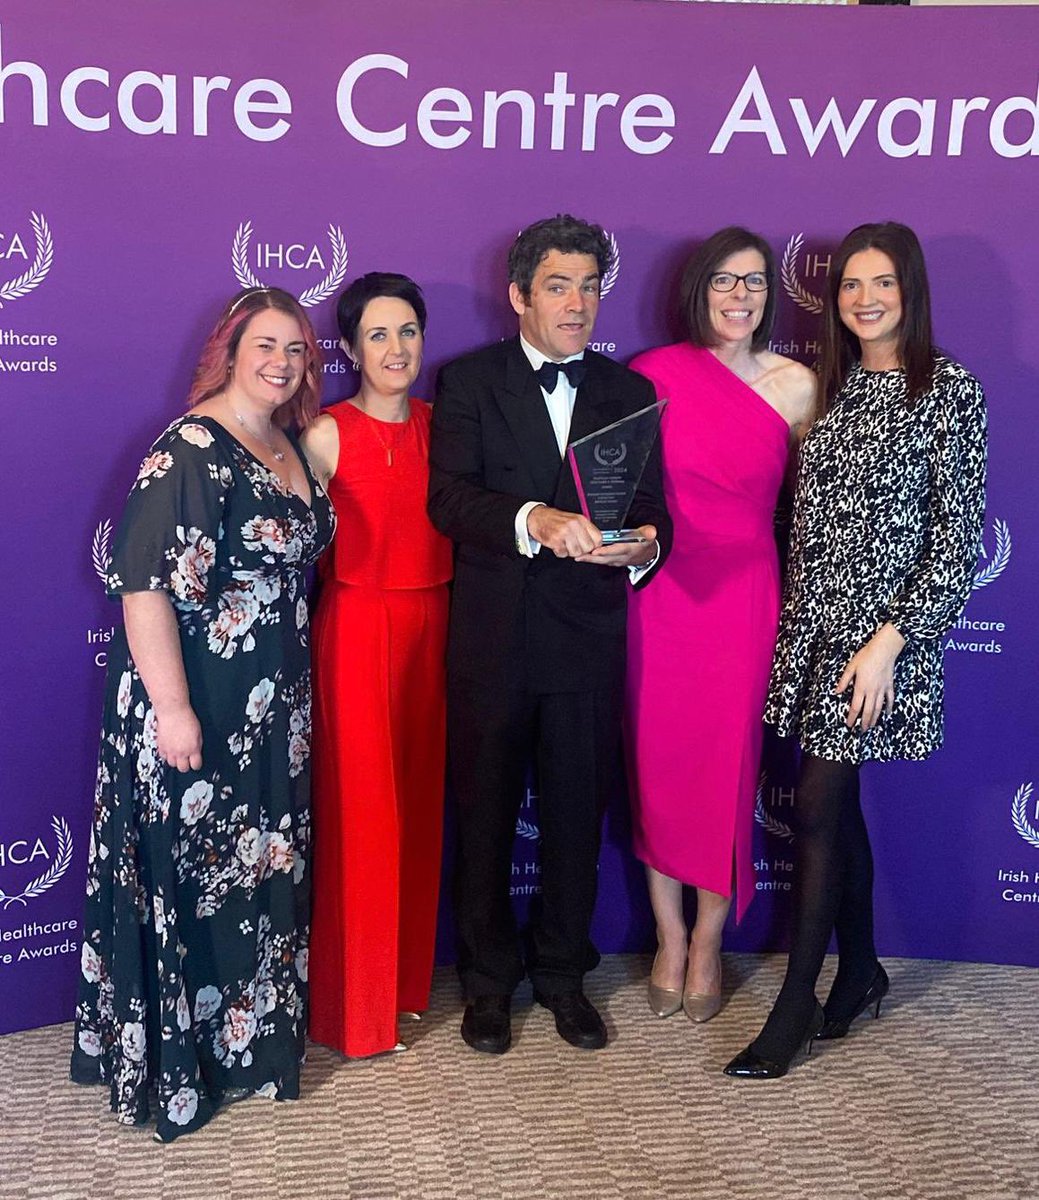 🎉Congratulations to our @AmbulanceNAS #IPATS Nurse-Led Retrieval Team, who are winners of the Healthcare Initiative, Child Health & Wellbeing category at the Irish Healthcare Awards 2024! Fitting to win this on International Nurses Day too! #IHCA24 #internationalnursesday 👏